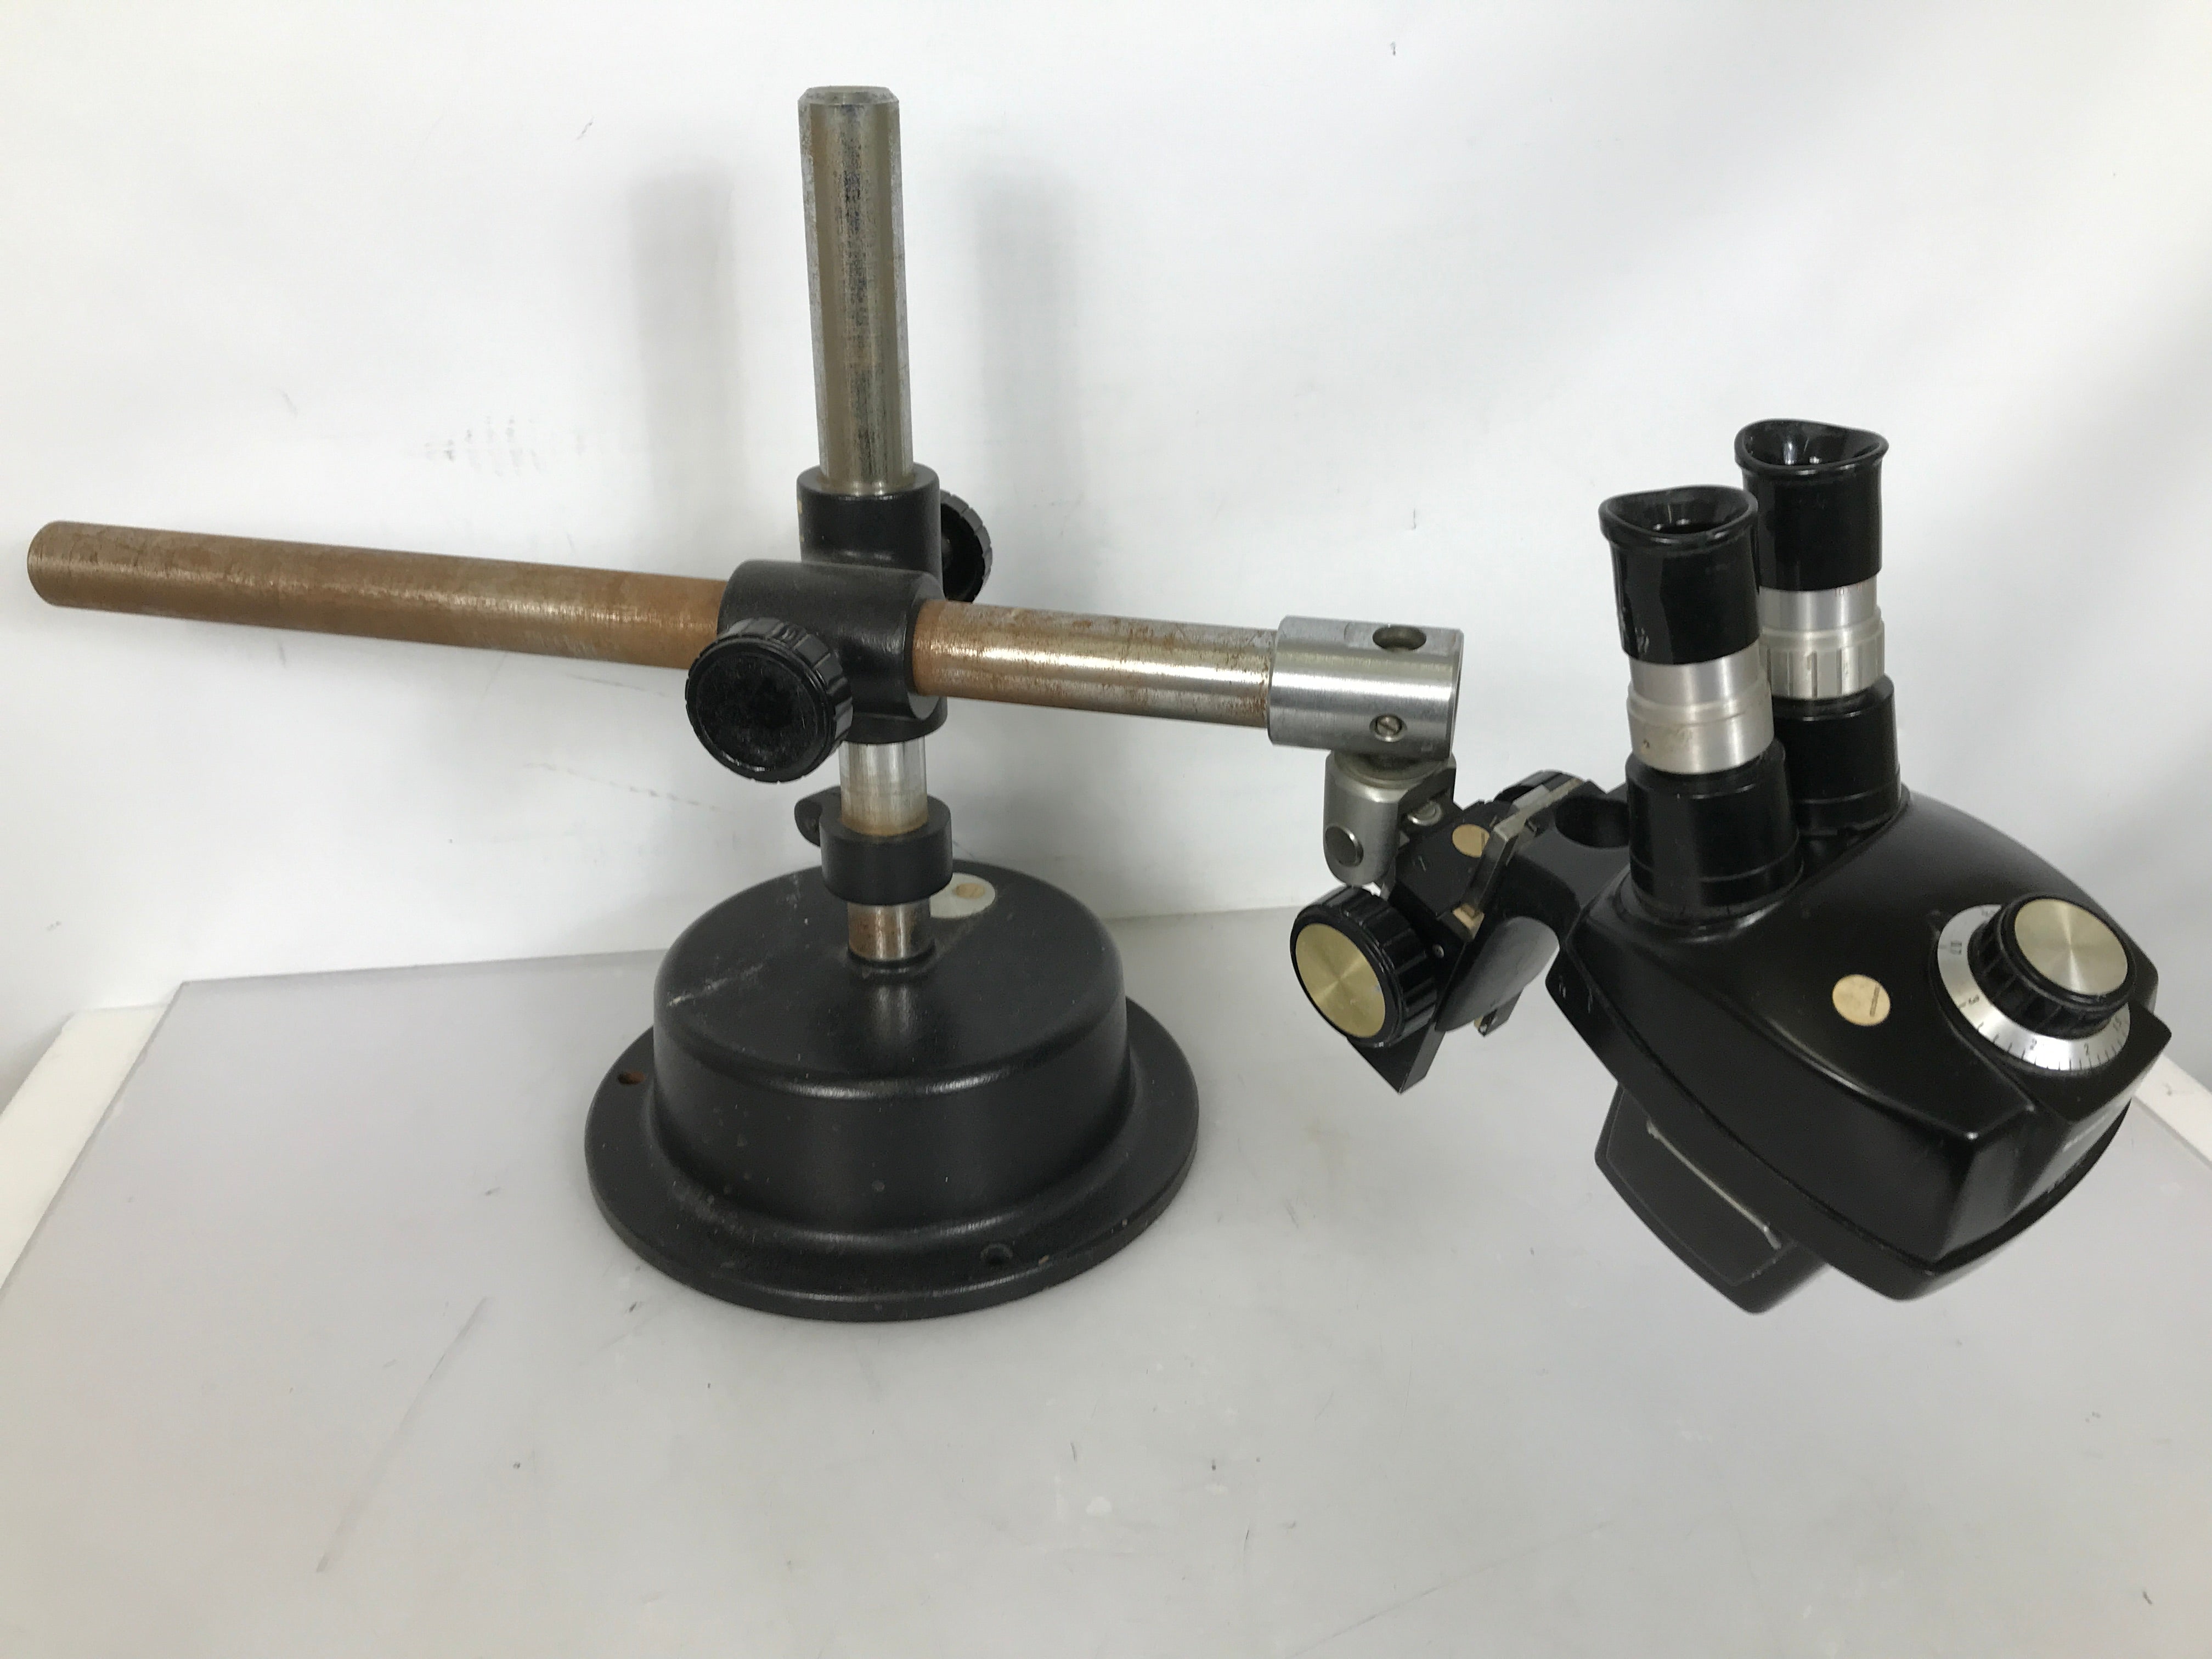 Bausch & Lomb Stereozoom 4 Microscope 0.7X-3X with Boom Stand